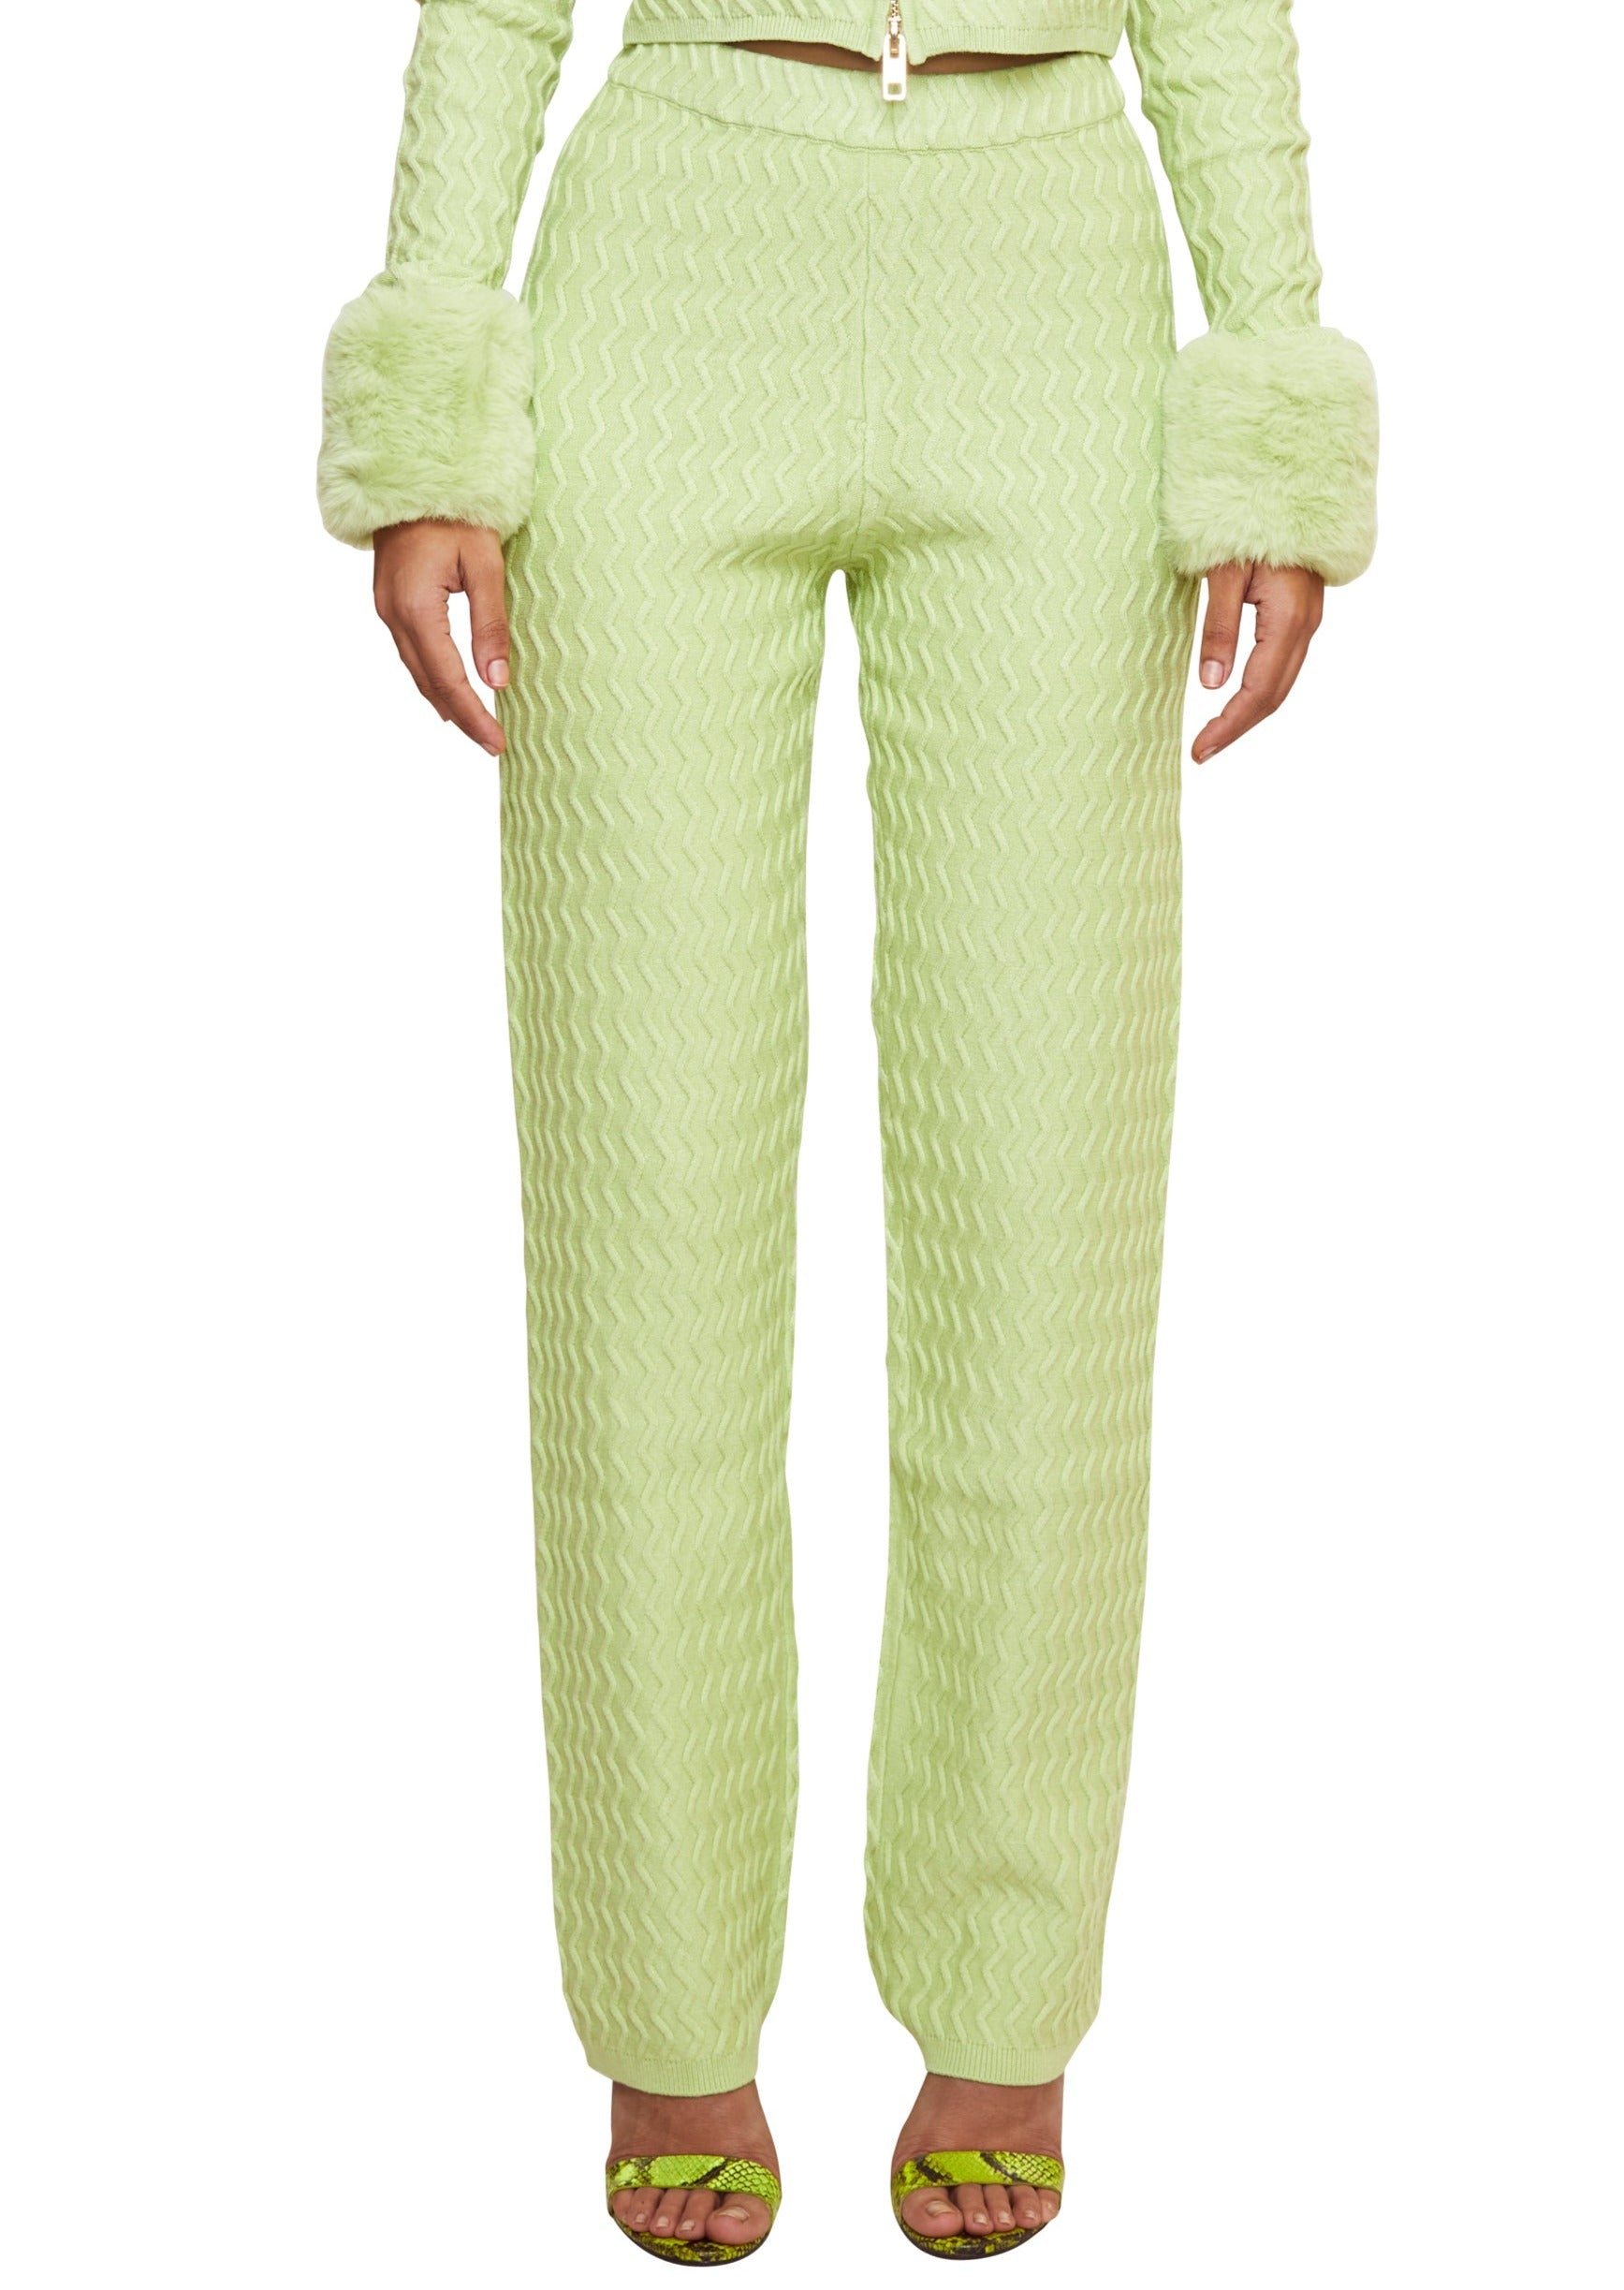 Green wavy rib stretchy pants from the brand House of Sunny